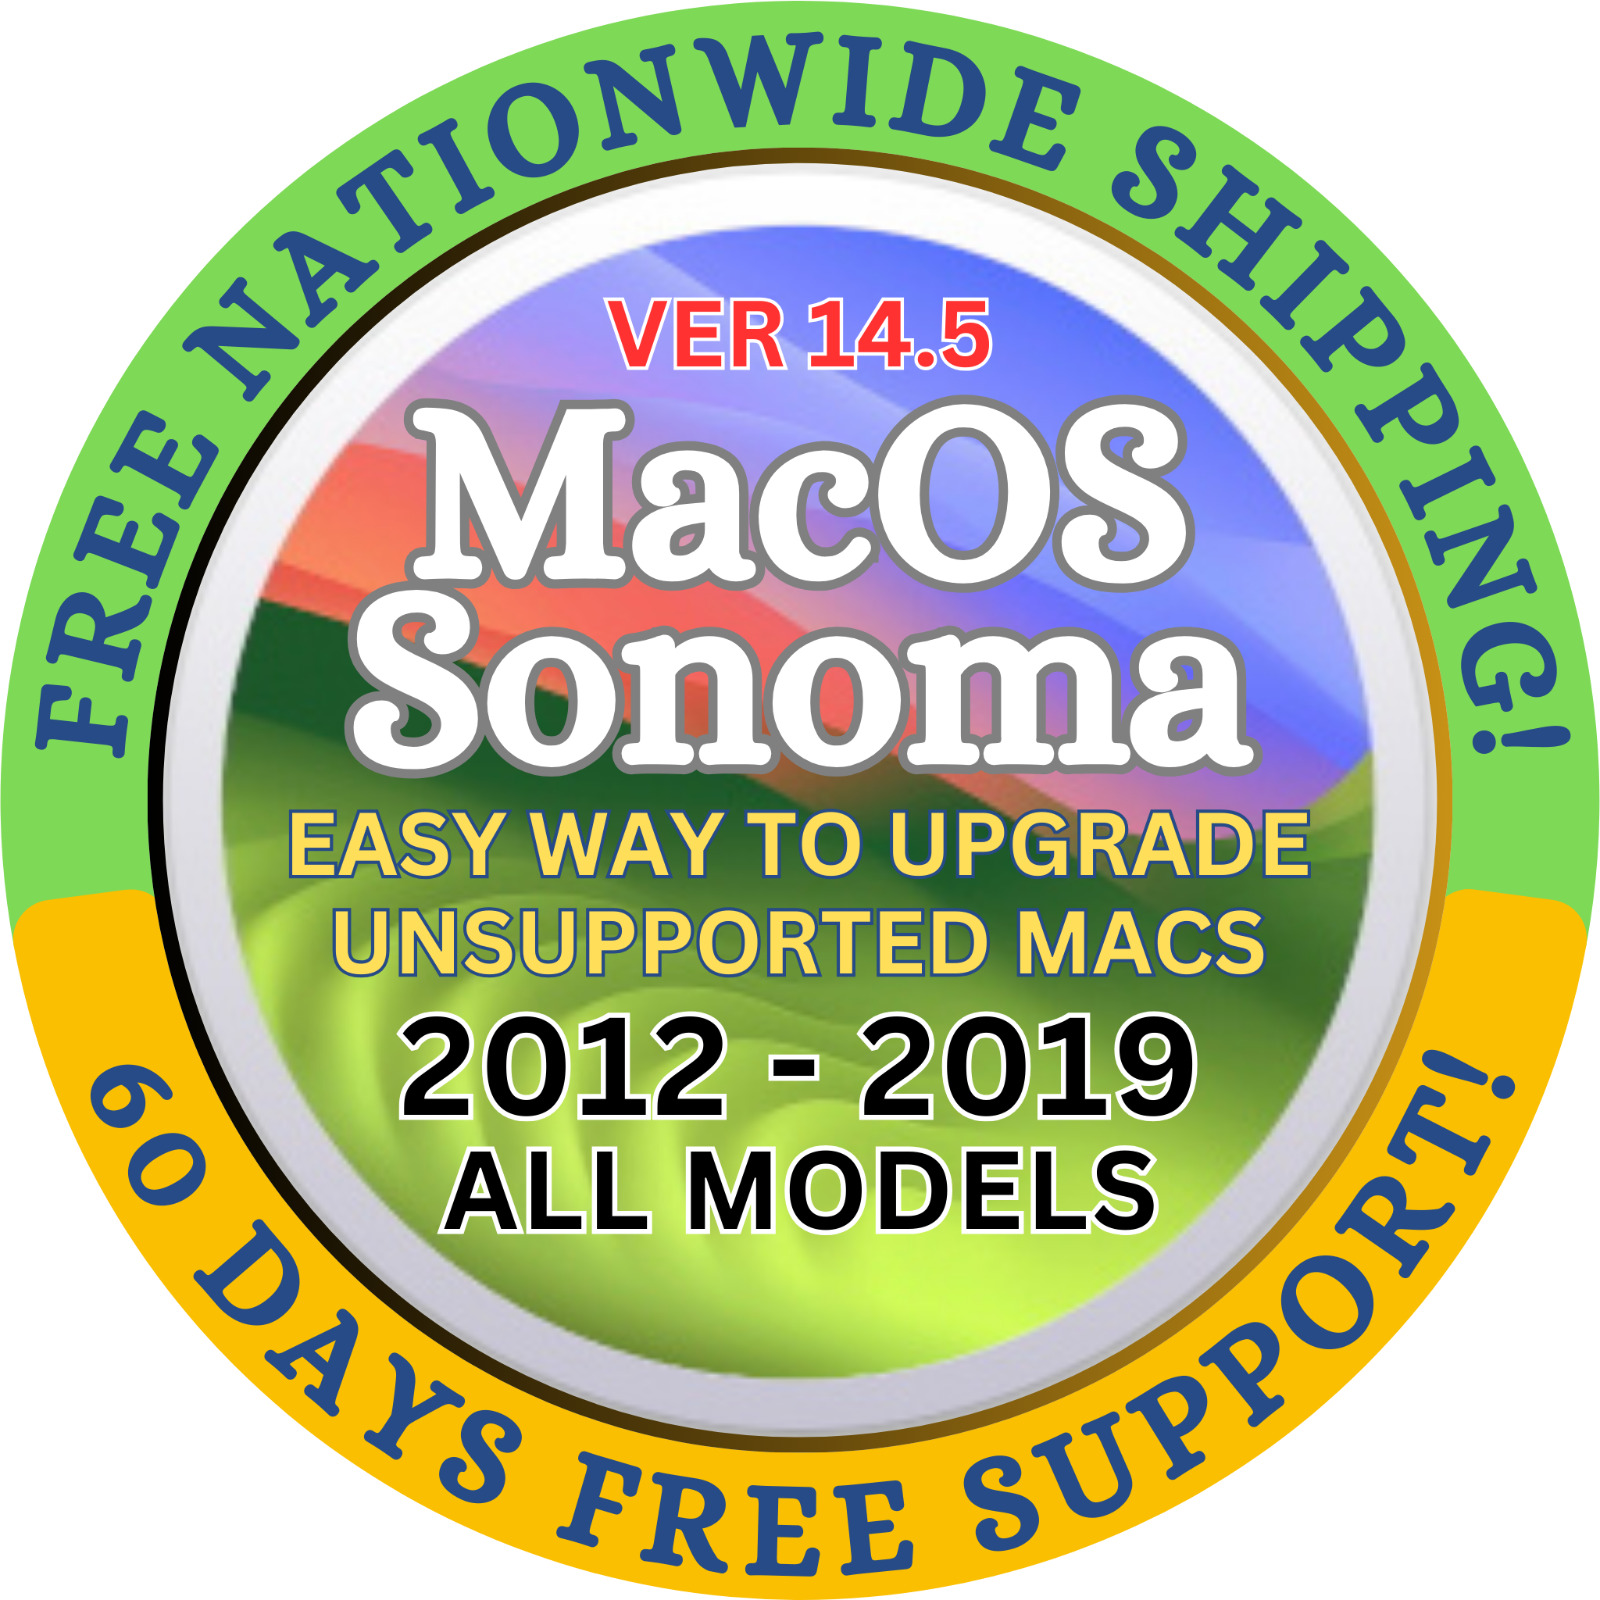 MacOS Sonoma USB for Unsupported Apple MacBook Pro 2012 2013 2014 2015 2016 2017